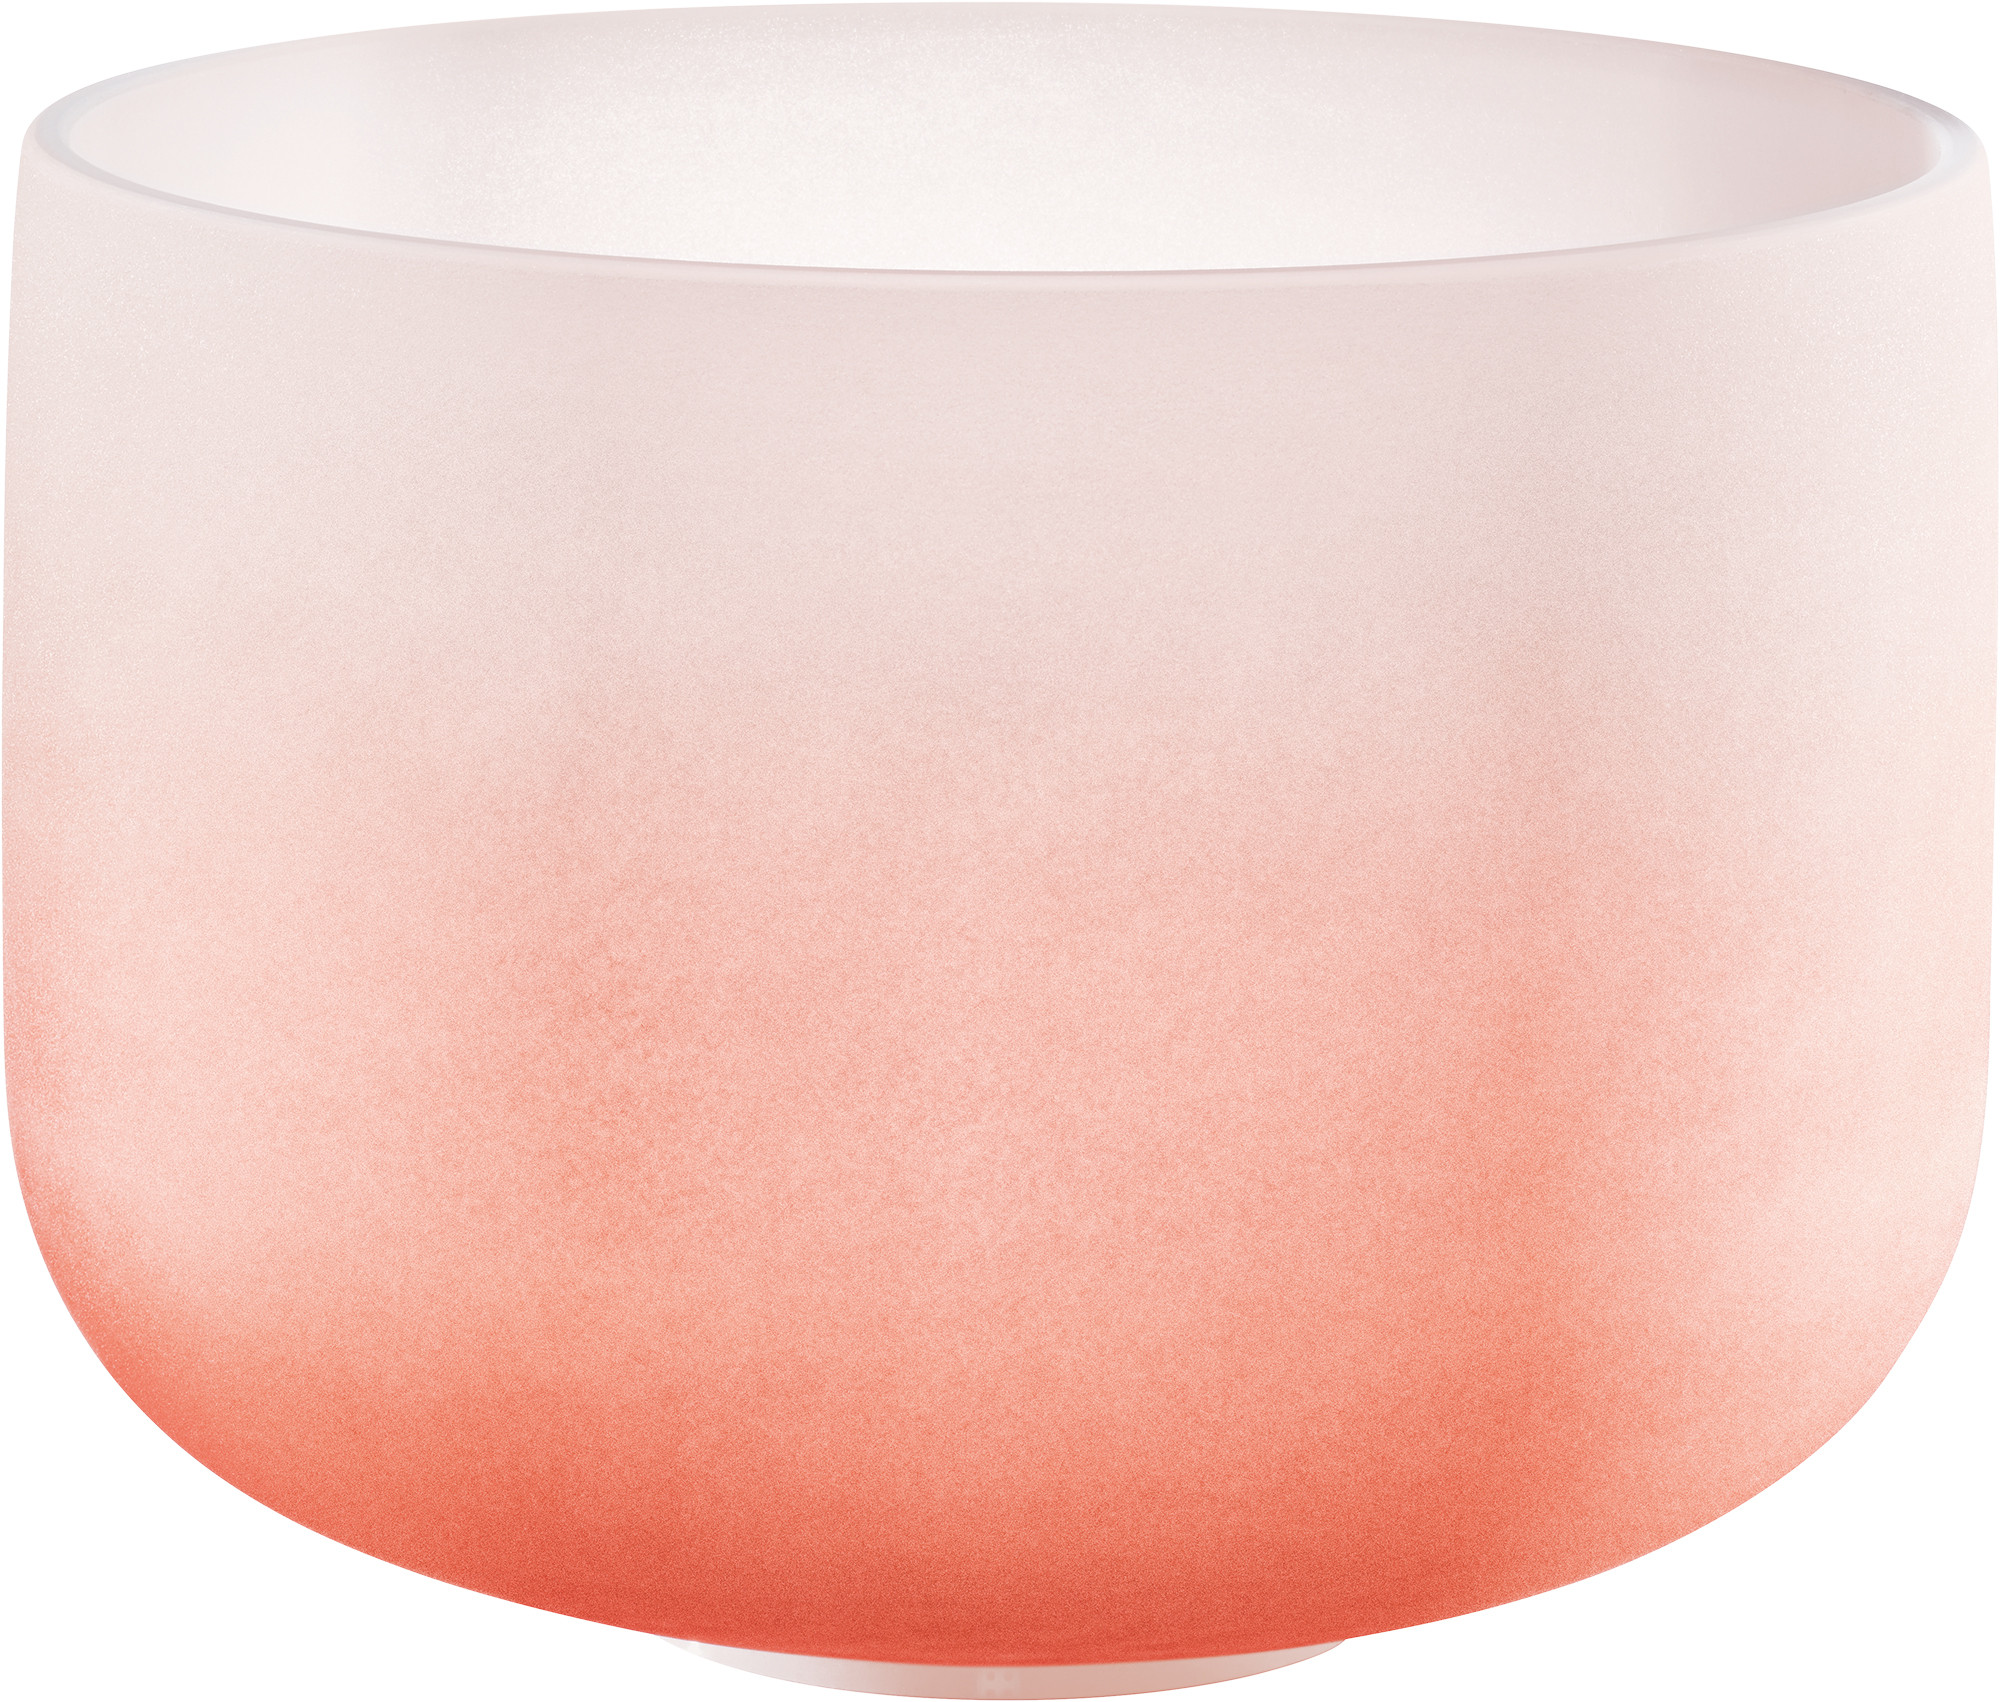 Meinl Sonic Energy Marble Crystal Singing Bowl 10, Note C4, Root Chakra